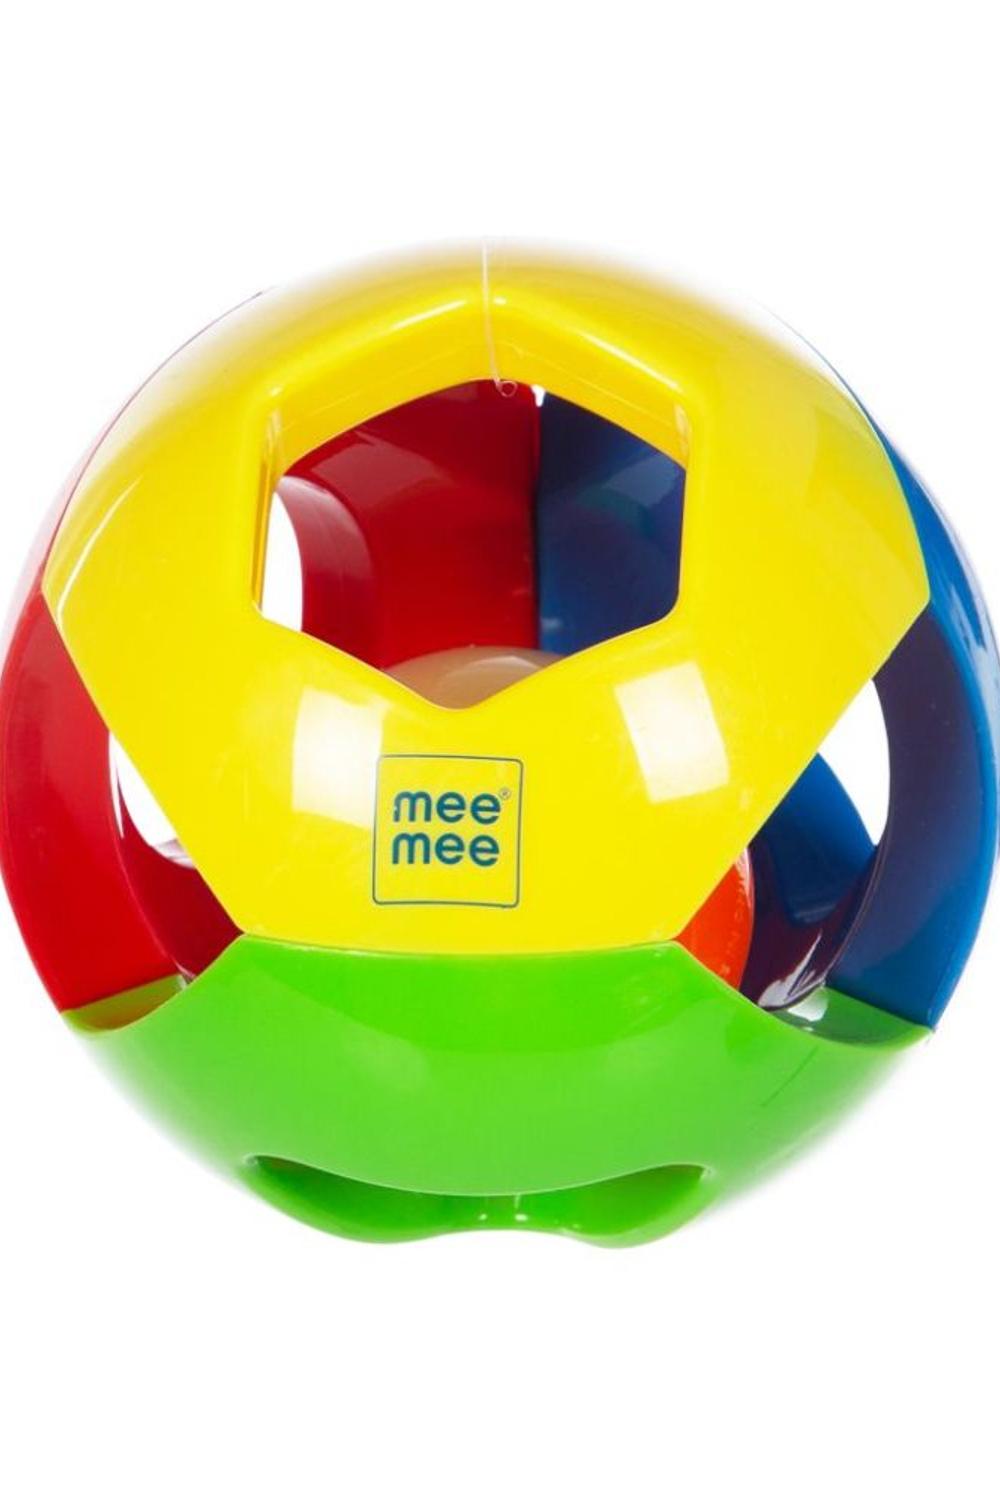 Mee Mee Colourful Rattle Ball